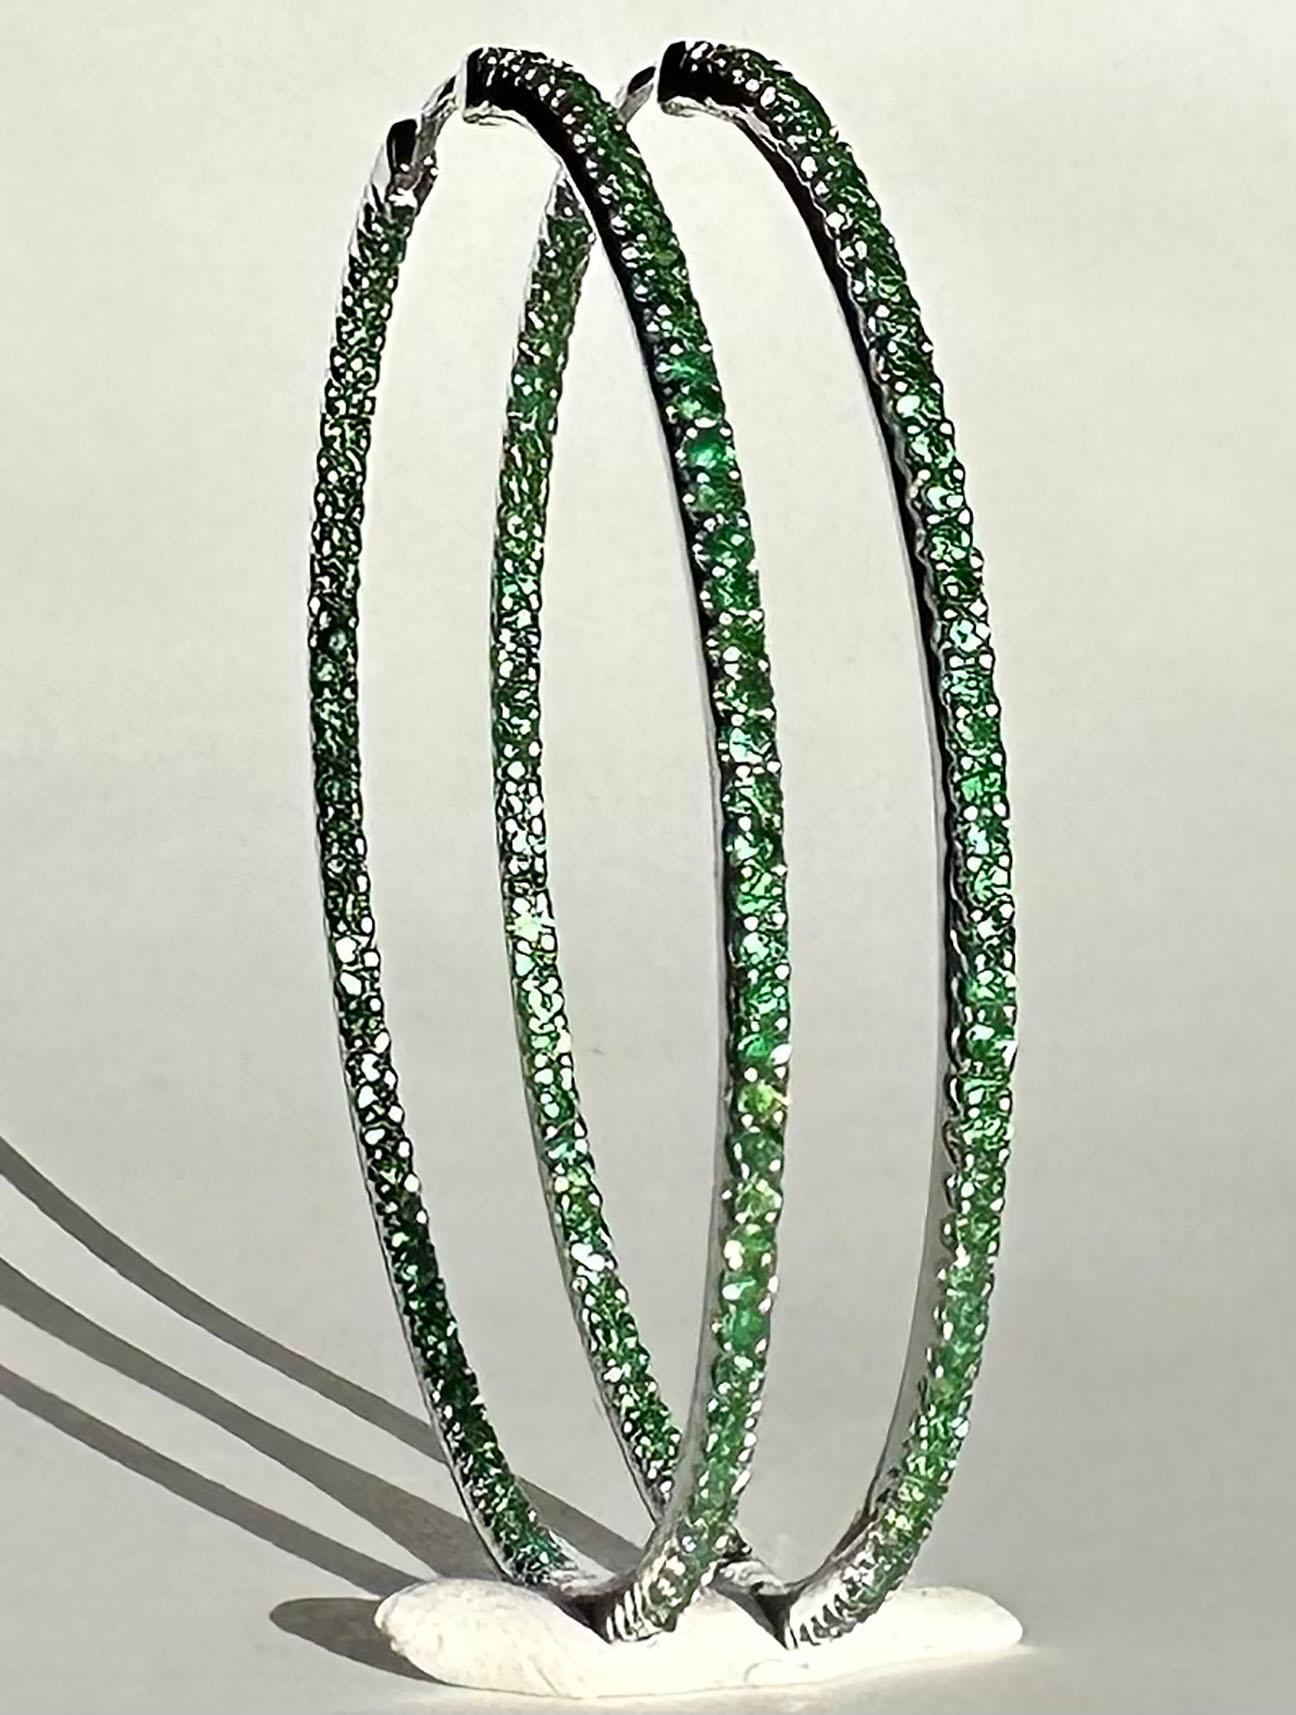 A pair of luxurious Silver Hoop Earrings set with 190 1.4MM Tsavorite Garnets. All these scintillating garnets face forward to catch light and attention. Be the center of attention wherever you wear these as they are eye and attention catching